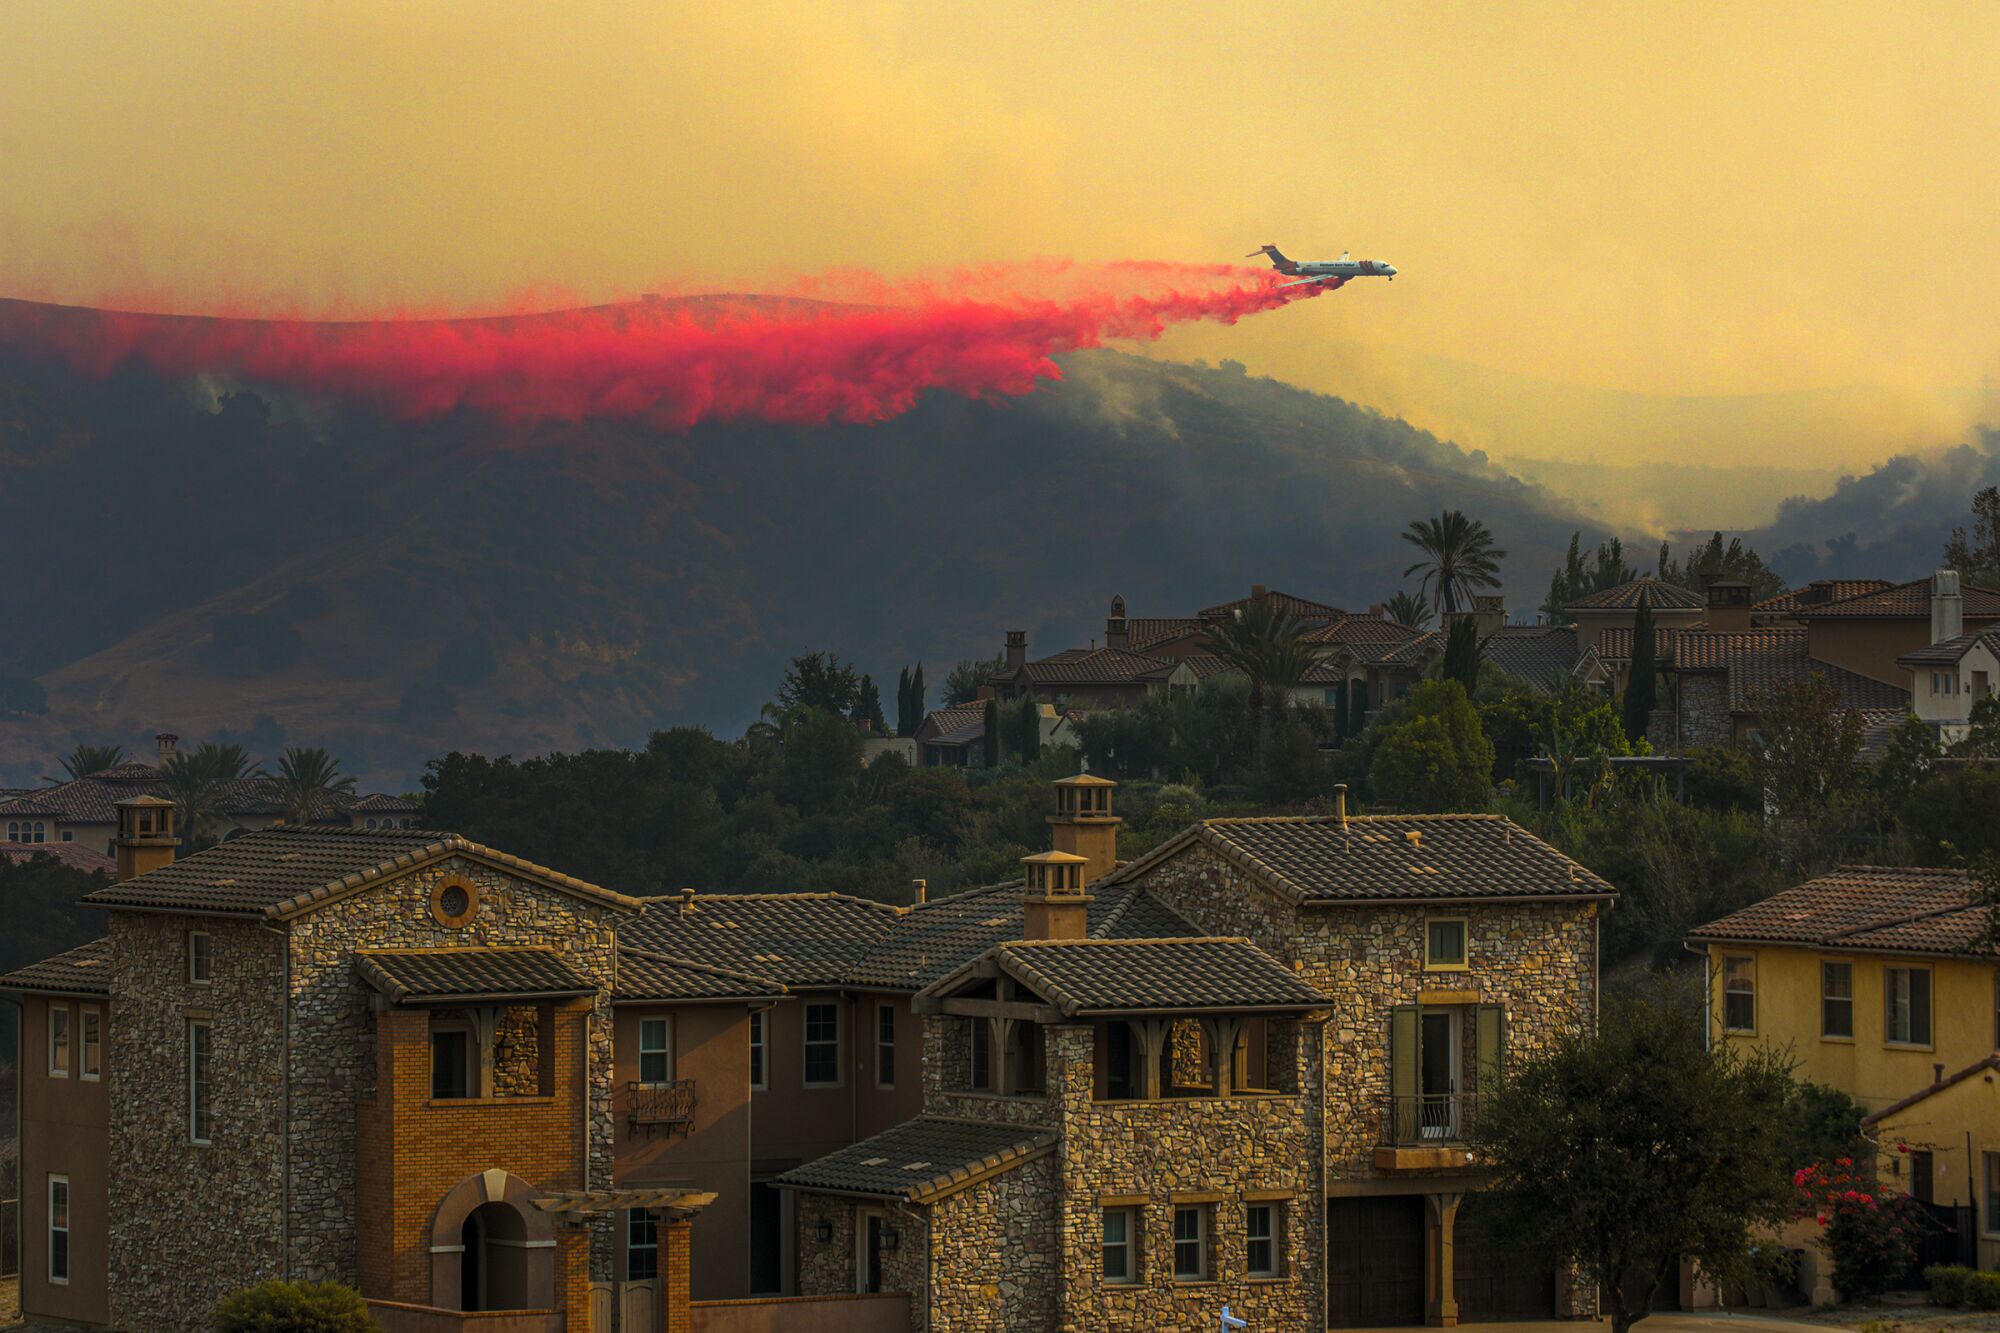 An air tanker drops fire retardant behind homes in Chino Hills, which are strewn across a pastoral landscape.